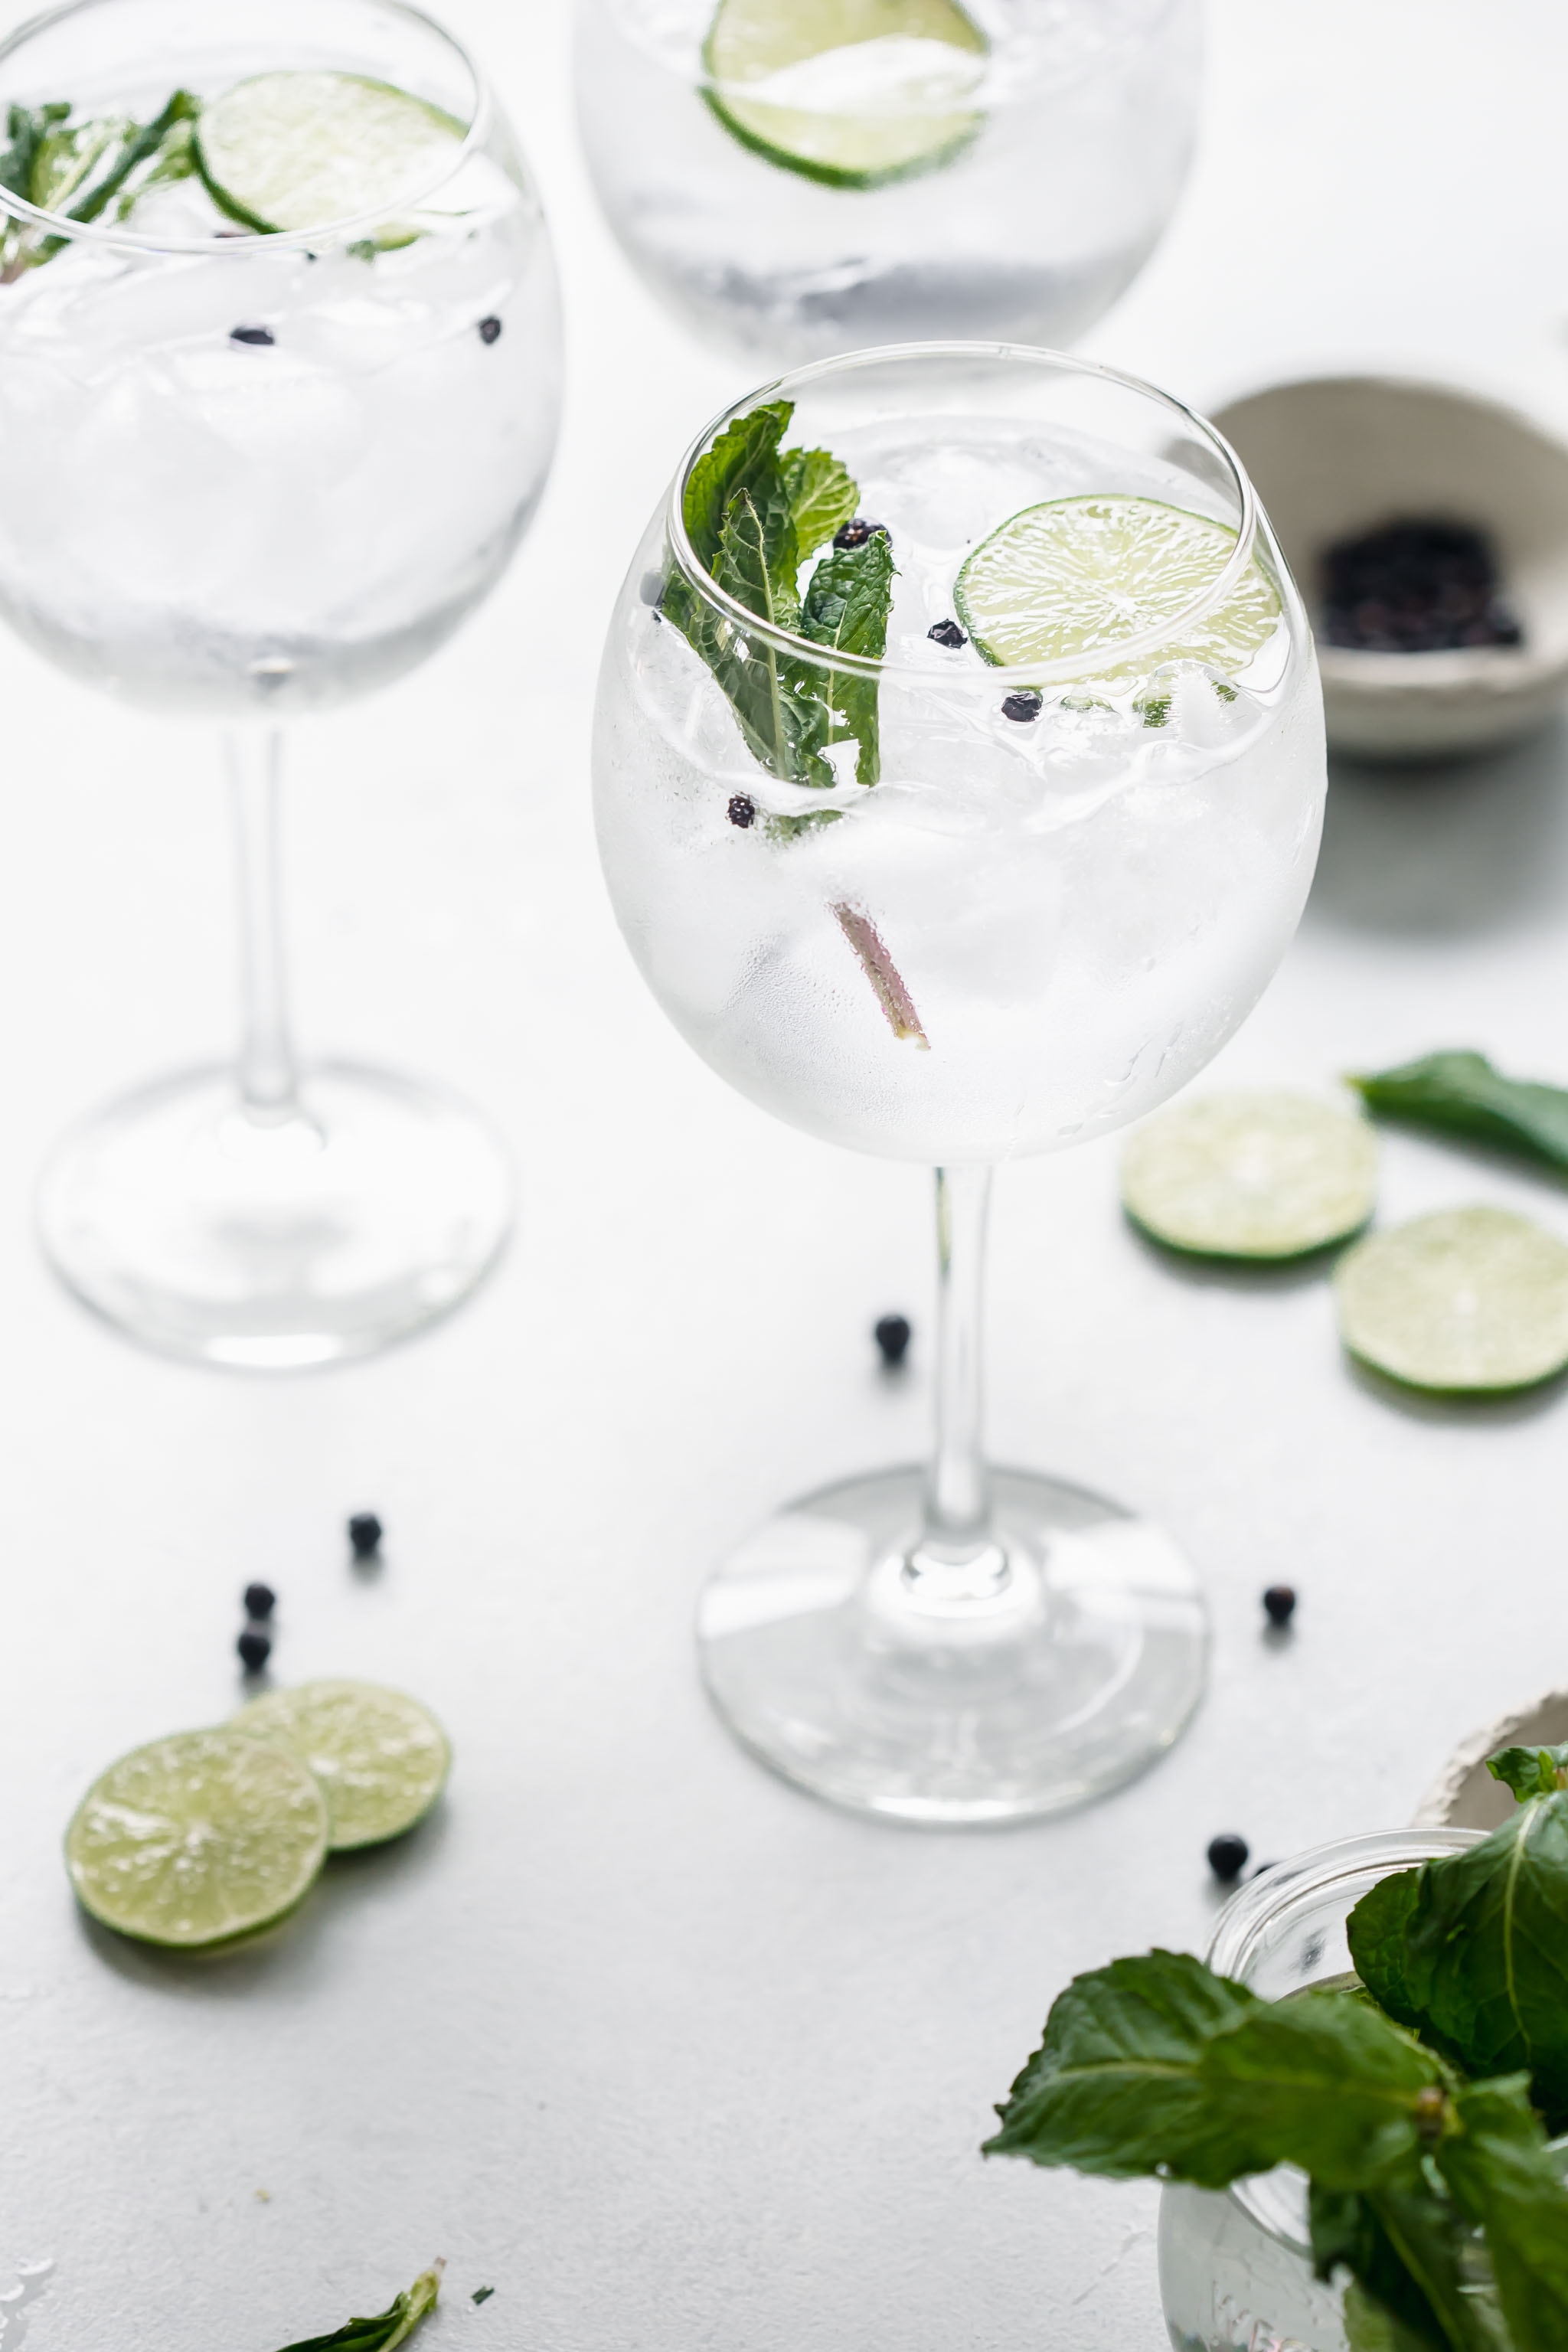 Gin And Tonic Recipe 3 Ways To Customize The Classic Cocktail,Indian Hawthorn Plant